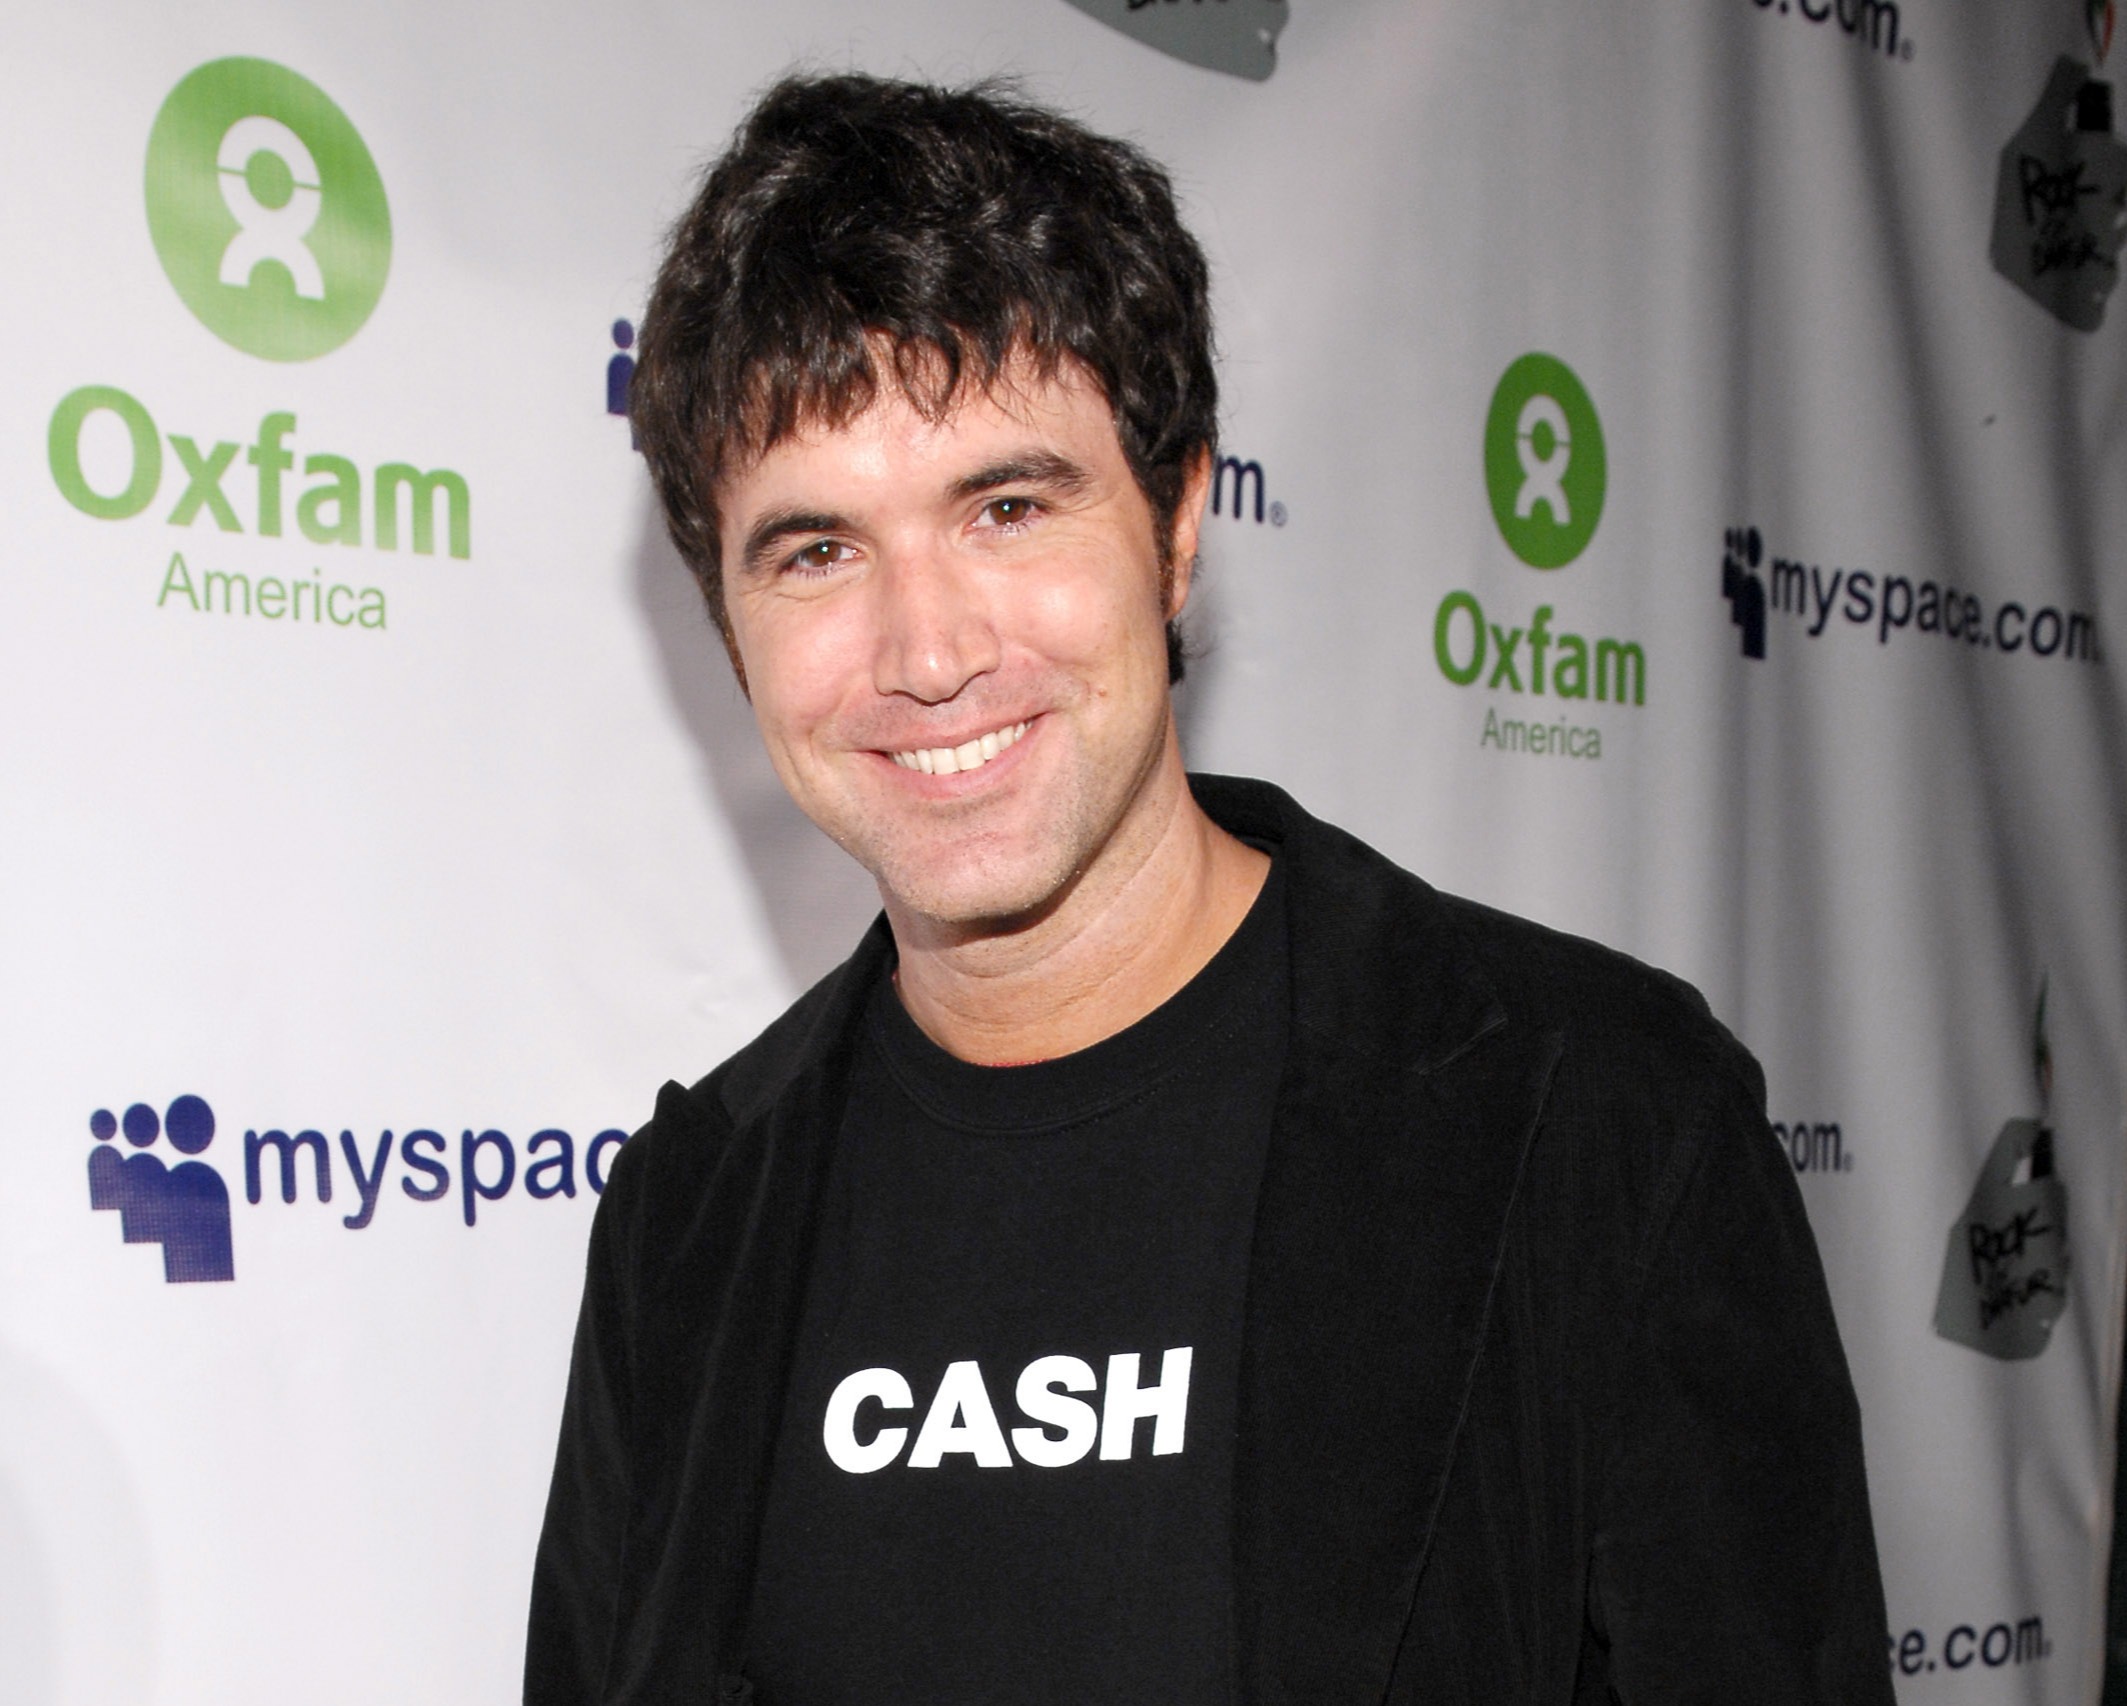 What Happened To Tom from MySpace